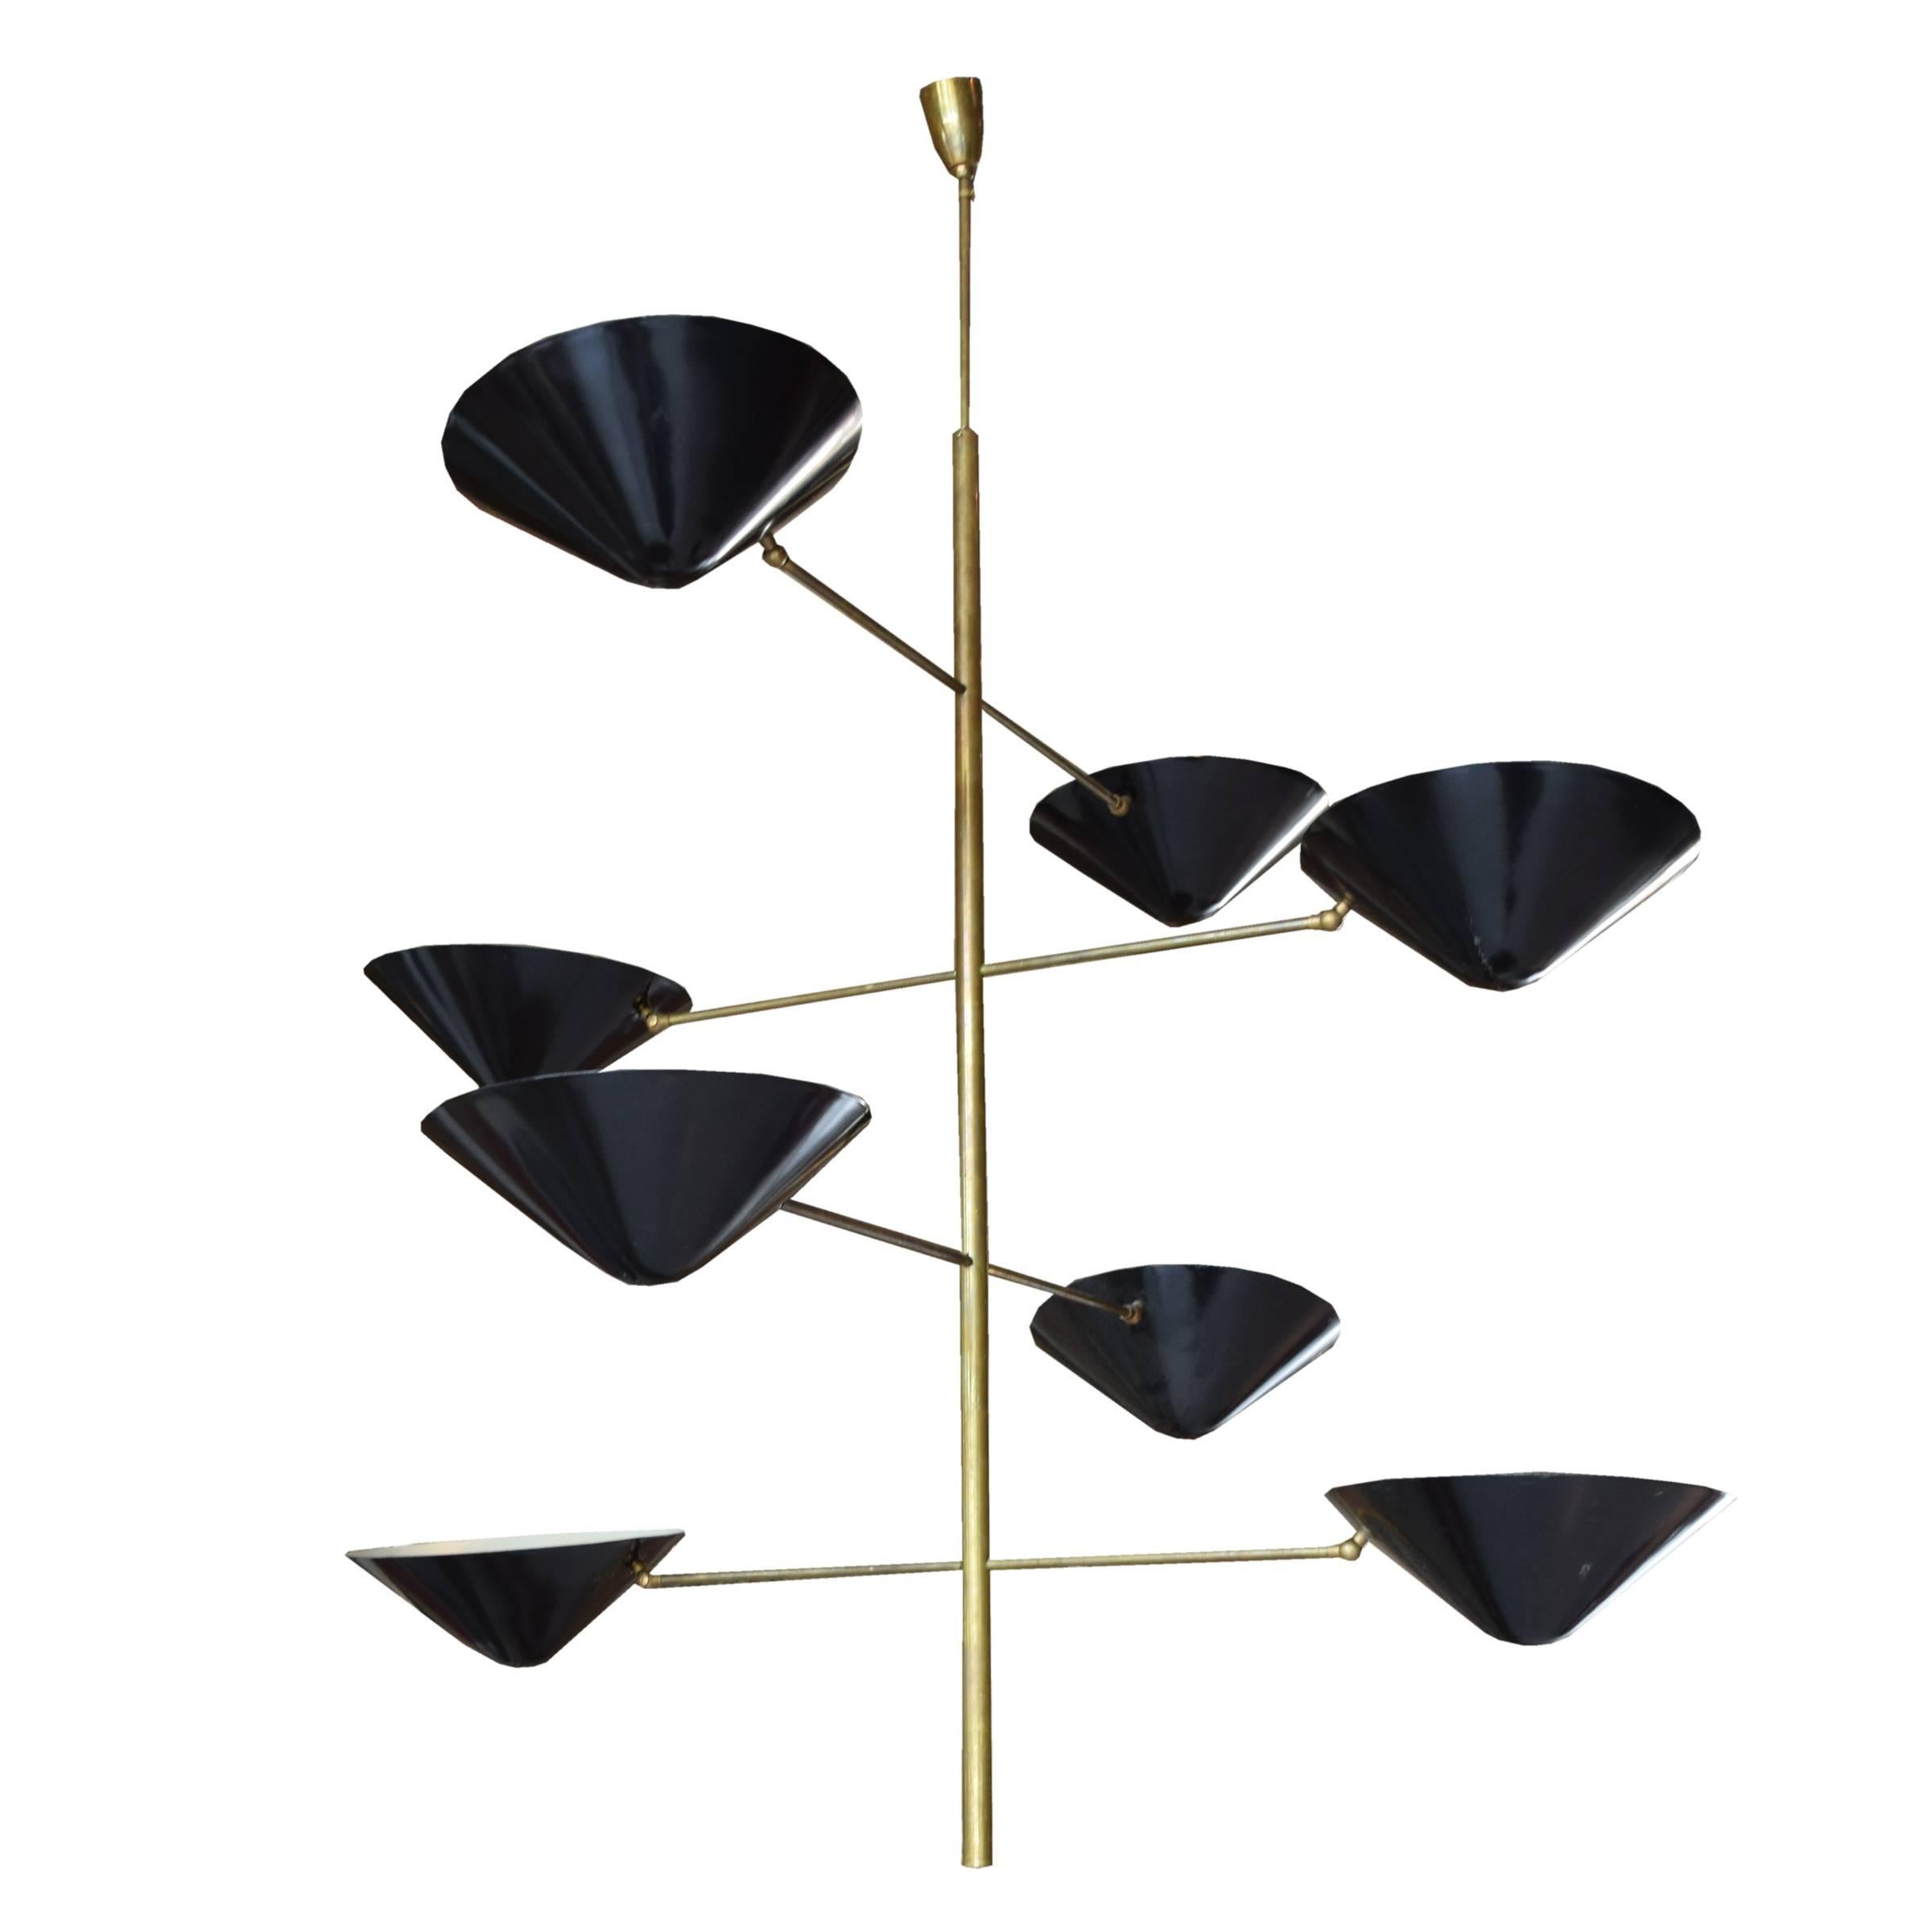 An Italian Mid-Century chandelier in the style of Stilnovo, with a brass frame and eight arms with adjustable black conical shades.
Pair available.

Requires re-wiring